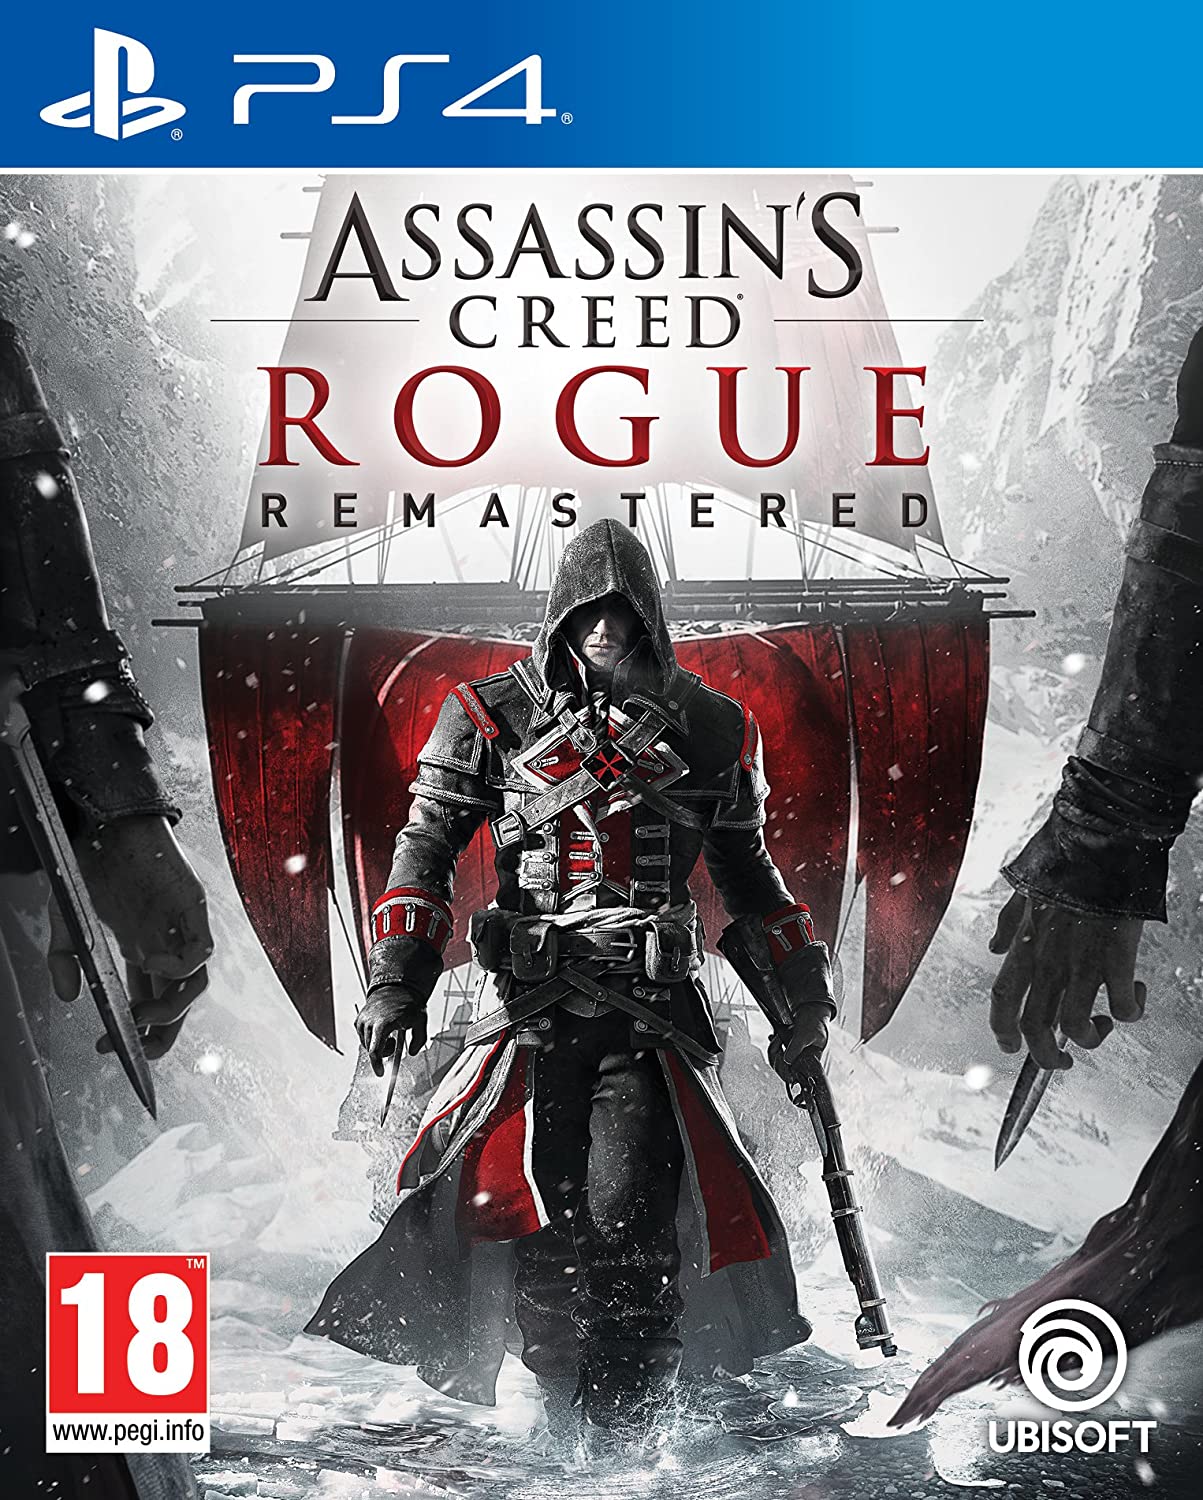 Assassin's Creed: Rogue Remastered [PS4] 5.05 / 6.72 / 7.02 [EUR] (2018) [Русский] (v1.01)